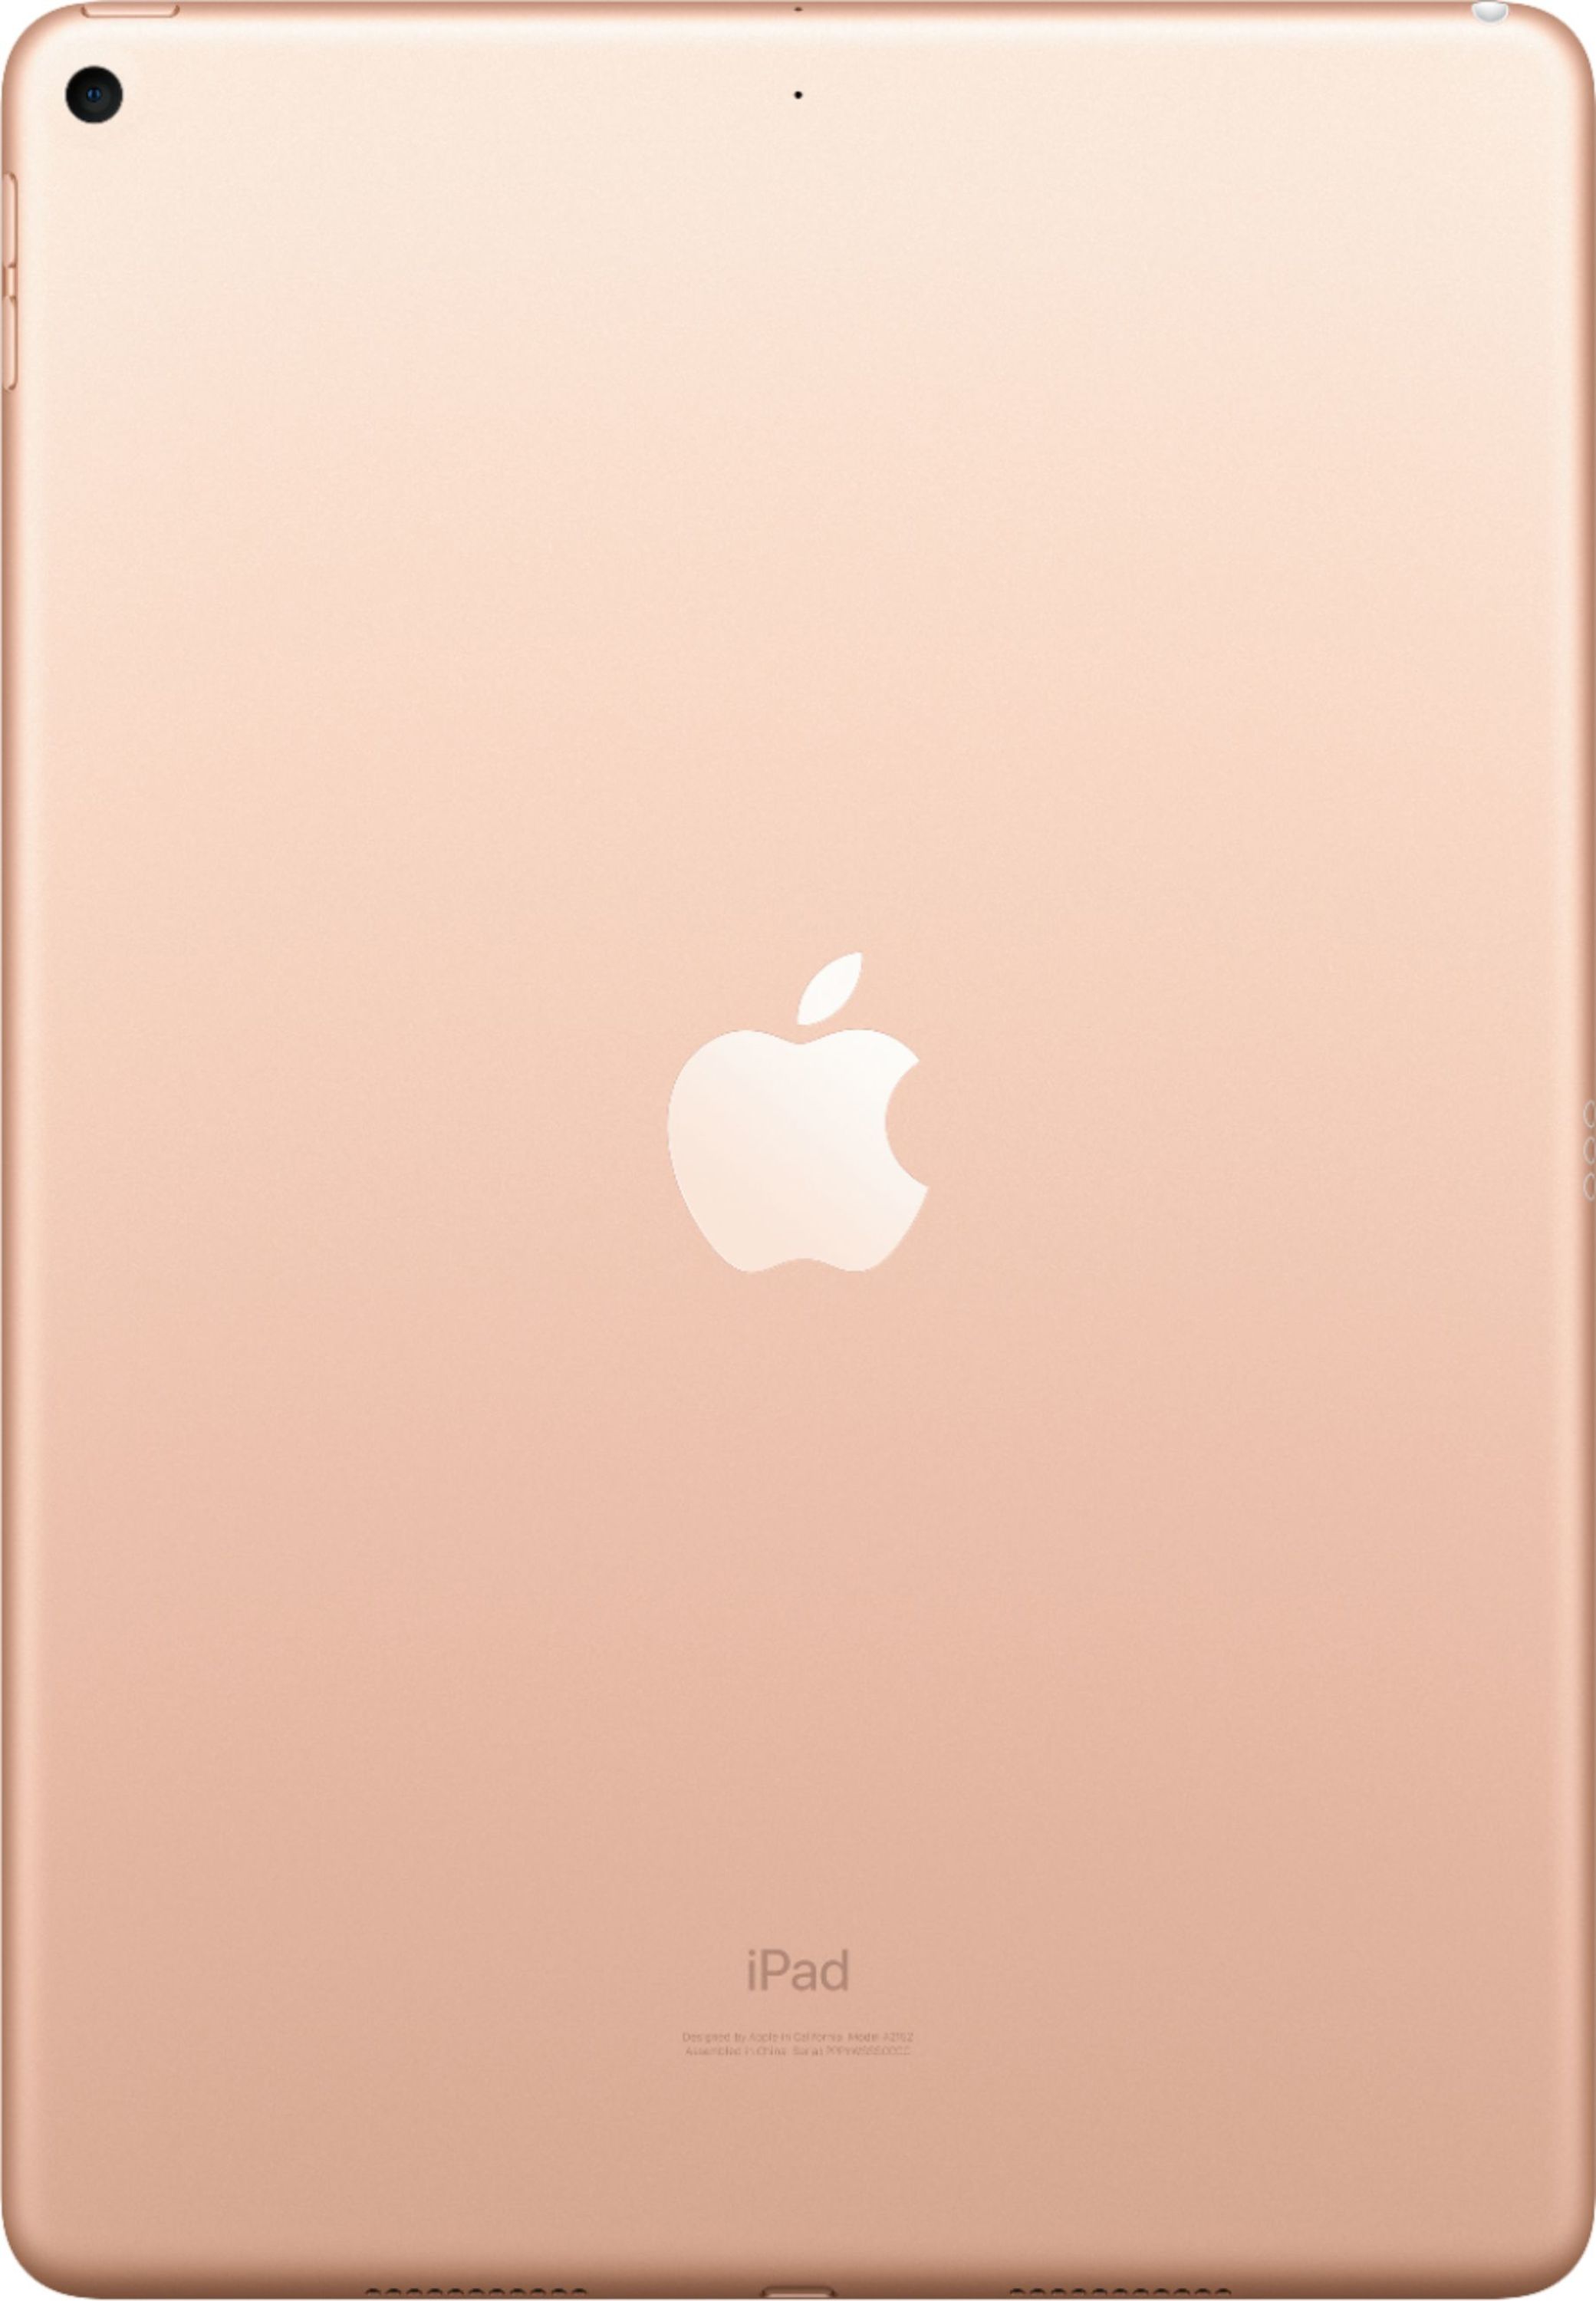 Apple iPad Air 3 64GB Wi-Fi Tablet (MUUL2LL/A) - Gold (Certified Used) - image 3 of 4